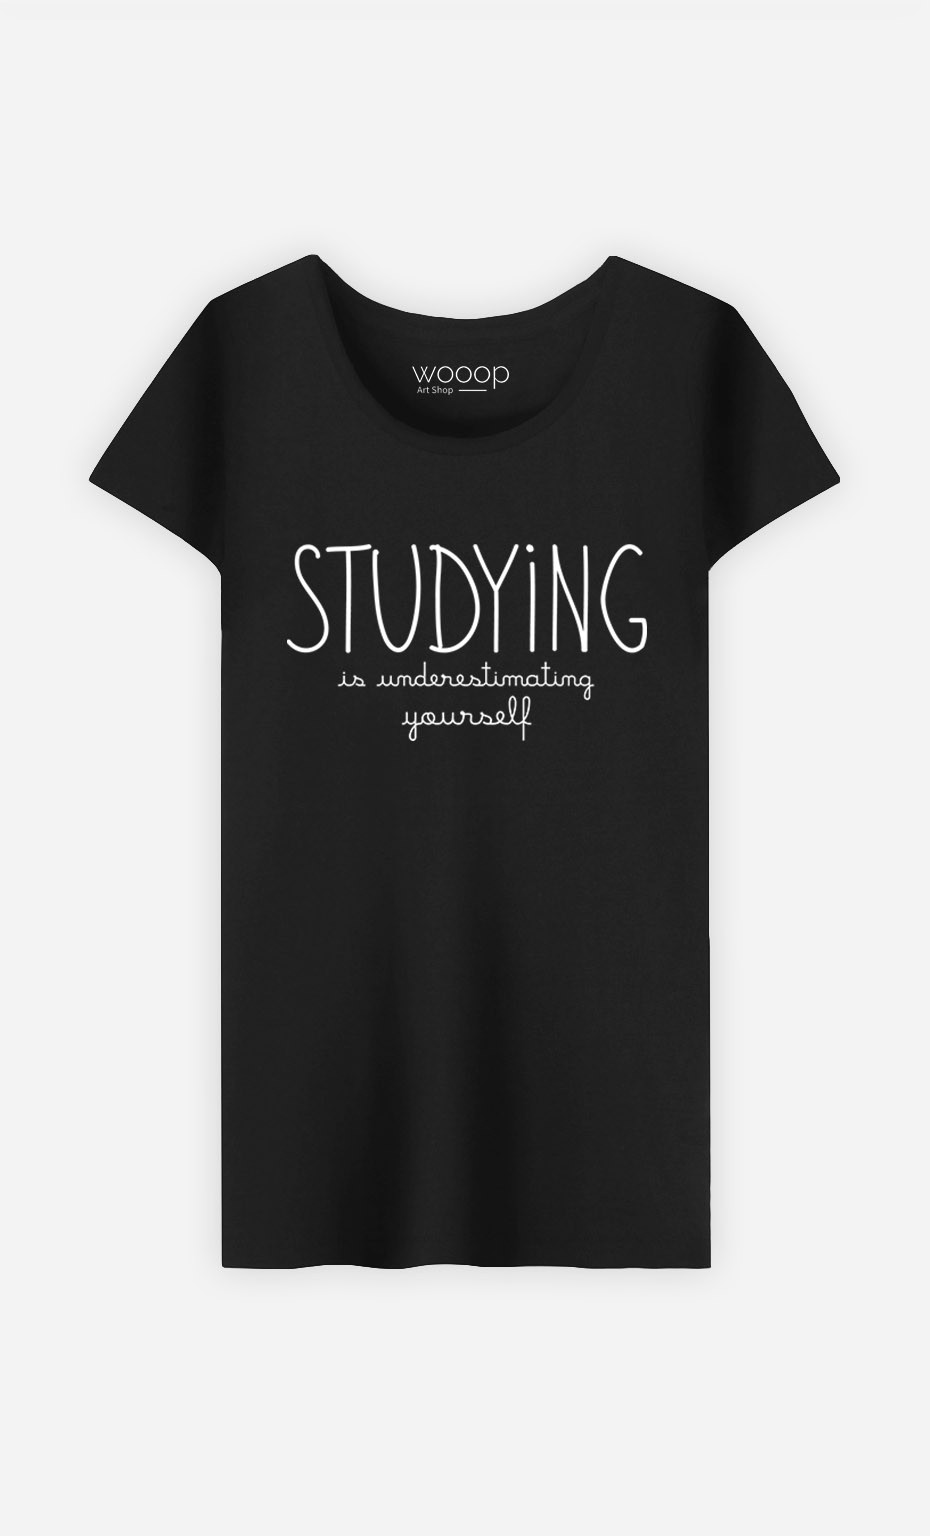 T-Shirt Studying is Underestimating Yourself